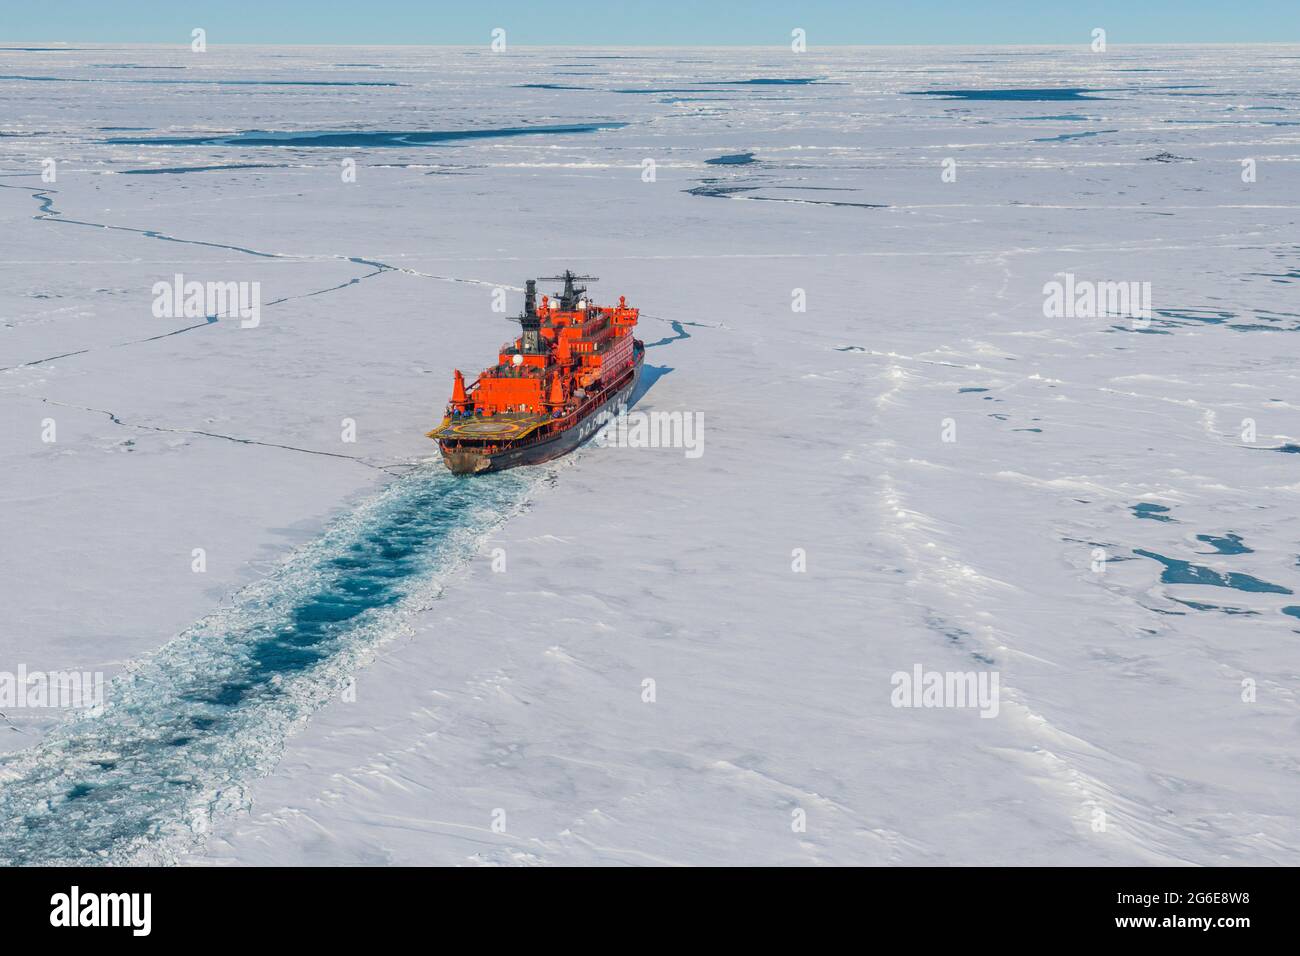 Aerial of the Icebreaker '50 years of victory' on its way to the North Pole breaking through the ice, Arctic Stock Photo